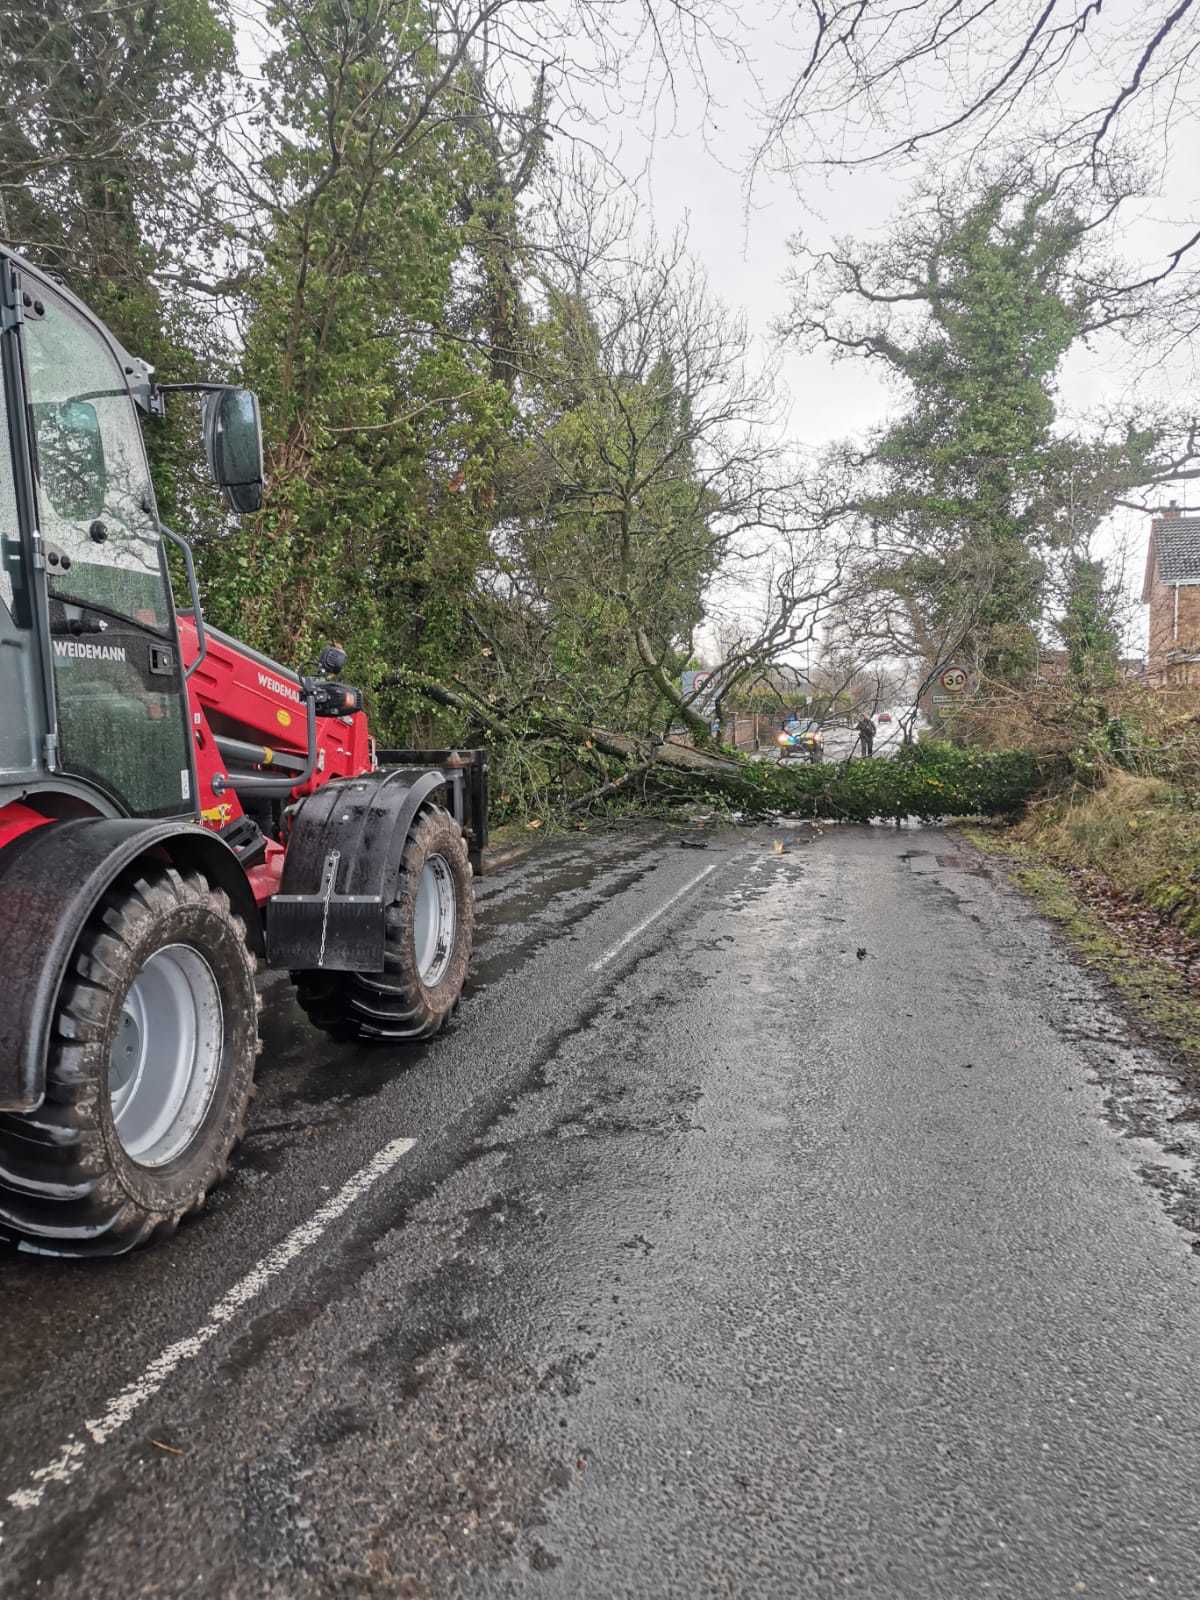 A local farmer assists with the removal of a tree on the Makenny Road, Ballinamallard.